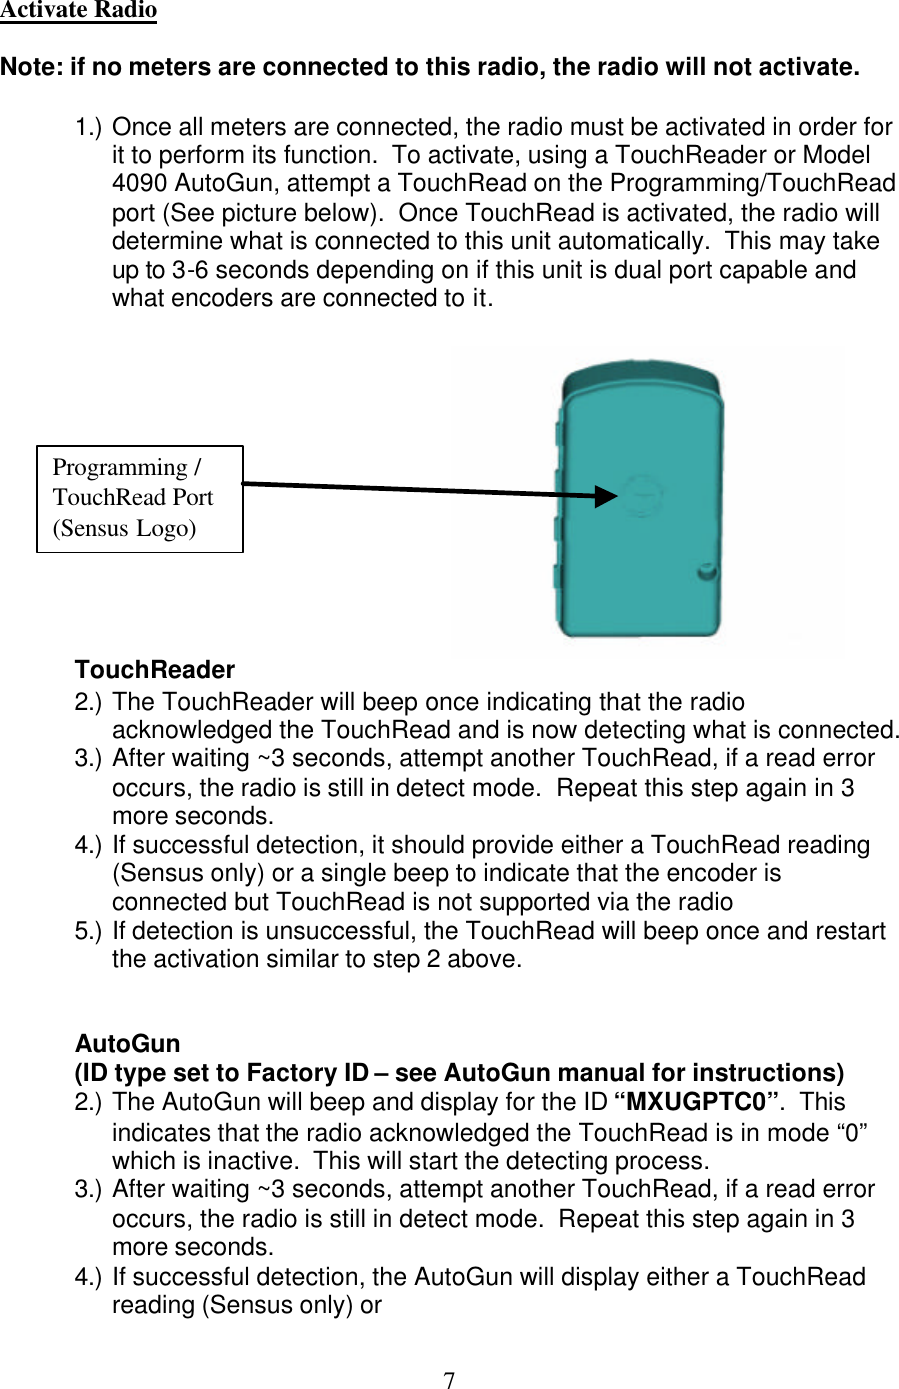  7Activate Radio  Note: if no meters are connected to this radio, the radio will not activate.  1.) Once all meters are connected, the radio must be activated in order for it to perform its function.  To activate, using a TouchReader or Model 4090 AutoGun, attempt a TouchRead on the Programming/TouchRead port (See picture below).  Once TouchRead is activated, the radio will determine what is connected to this unit automatically.  This may take up to 3-6 seconds depending on if this unit is dual port capable and what encoders are connected to it.              TouchReader 2.) The TouchReader will beep once indicating that the radio acknowledged the TouchRead and is now detecting what is connected. 3.) After waiting ~3 seconds, attempt another TouchRead, if a read error occurs, the radio is still in detect mode.  Repeat this step again in 3 more seconds. 4.) If successful detection, it should provide either a TouchRead reading (Sensus only) or a single beep to indicate that the encoder is connected but TouchRead is not supported via the radio 5.) If detection is unsuccessful, the TouchRead will beep once and restart the activation similar to step 2 above.   AutoGun  (ID type set to Factory ID – see AutoGun manual for instructions) 2.) The AutoGun will beep and display for the ID “MXUGPTC0”.  This indicates that the radio acknowledged the TouchRead is in mode “0” which is inactive.  This will start the detecting process. 3.) After waiting ~3 seconds, attempt another TouchRead, if a read error occurs, the radio is still in detect mode.  Repeat this step again in 3 more seconds. 4.) If successful detection, the AutoGun will display either a TouchRead reading (Sensus only) or Programming / TouchRead Port (Sensus Logo) 